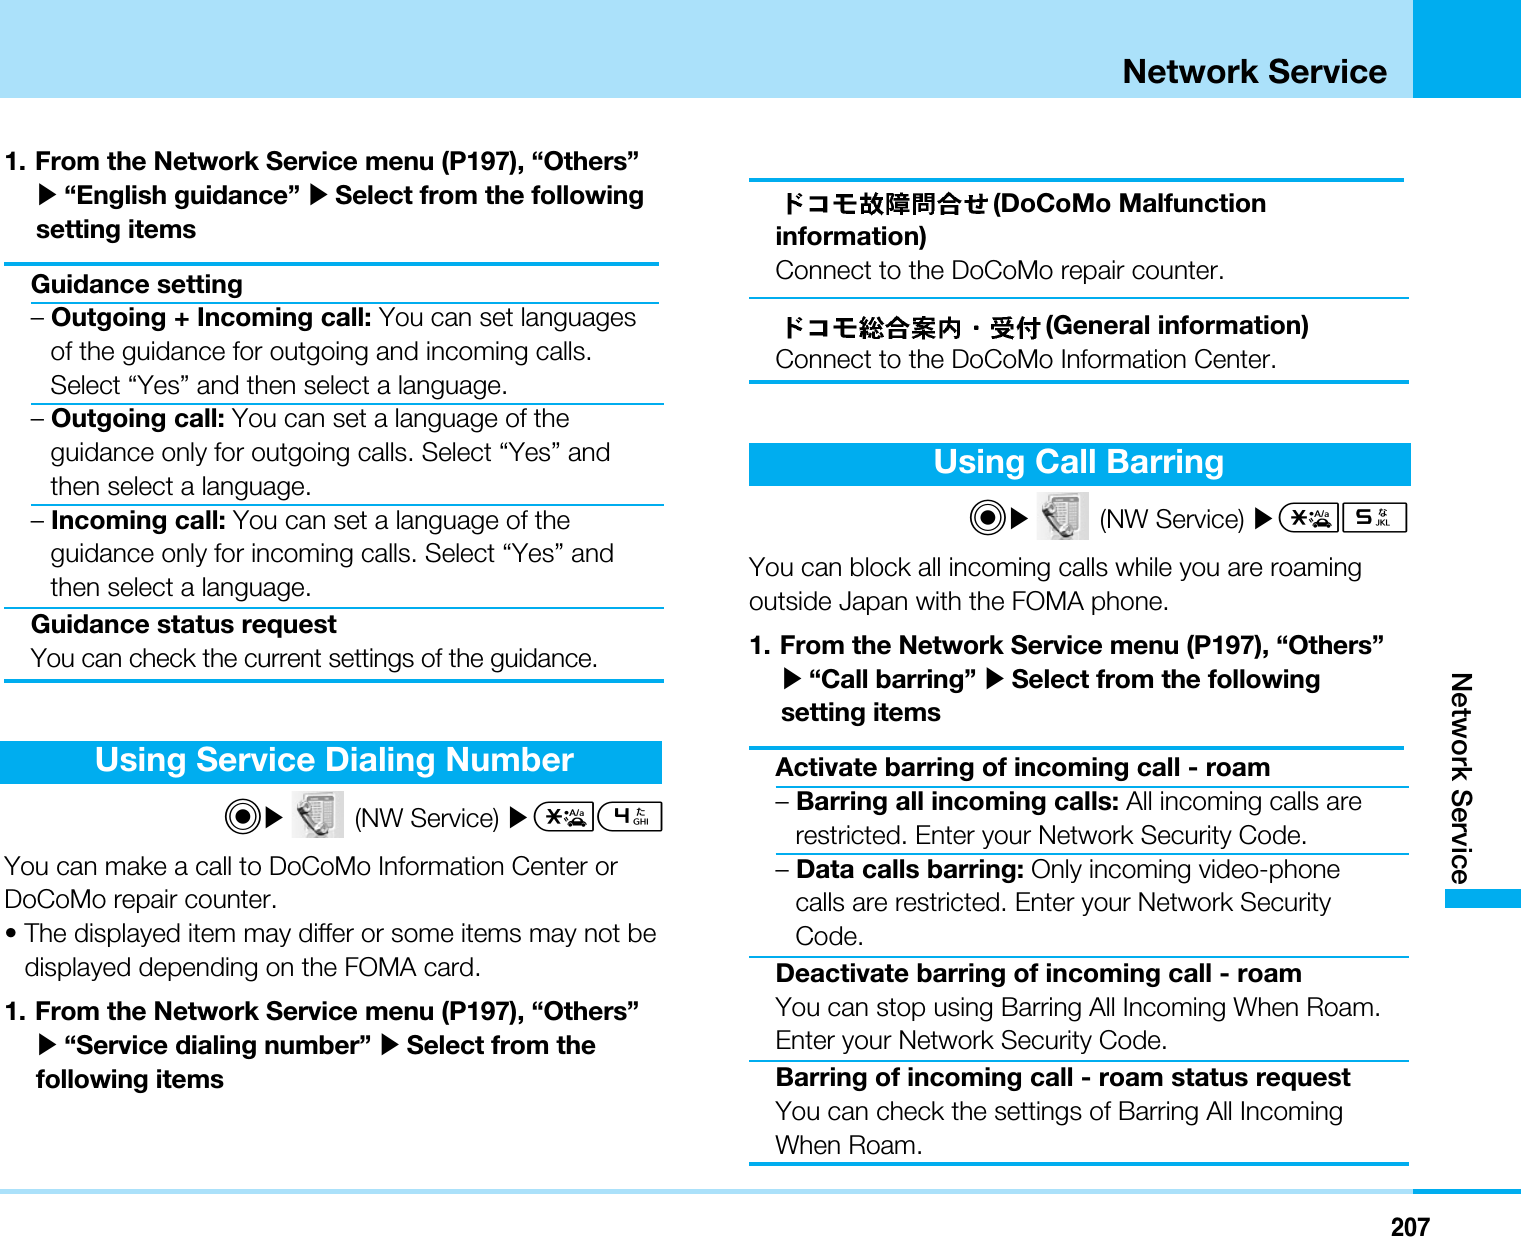 207Network ServiceNetwork Service1. From the Network Service menu (P197), “Others”]“English guidance” ]Select from the followingsetting itemsGuidance setting–Outgoing + Incoming call: You can set languagesof the guidance for outgoing and incoming calls.Select “Yes” and then select a language.–Outgoing call: You can set a language of theguidance only for outgoing calls. Select “Yes” andthen select a language.–Incoming call: You can set a language of theguidance only for incoming calls. Select “Yes” andthen select a language.Guidance status requestYou can check the current settings of the guidance.Using Service Dialing NumberC](NW Service) ]*4You can make a call to DoCoMo Information Center orDoCoMo repair counter.• The displayed item may differ or some items may not bedisplayed depending on the FOMA card.1. From the Network Service menu (P197), “Others”]“Service dialing number” ]Select from thefollowing items(DoCoMo Malfunctioninformation)Connect to the DoCoMo repair counter.(General information)Connect to the DoCoMo Information Center.Using Call BarringC](NW Service) ]*5You can block all incoming calls while you are roamingoutside Japan with the FOMA phone.1. From the Network Service menu (P197), “Others”]“Call barring” ]Select from the followingsetting itemsActivate barring of incoming call - roam–Barring all incoming calls: All incoming calls arerestricted. Enter your Network Security Code.–Data calls barring: Only incoming video-phonecalls are restricted. Enter your Network SecurityCode.Deactivate barring of incoming call - roamYou can stop using Barring All Incoming When Roam.Enter your Network Security Code.Barring of incoming call - roam status requestYou can check the settings of Barring All IncomingWhen Roam.